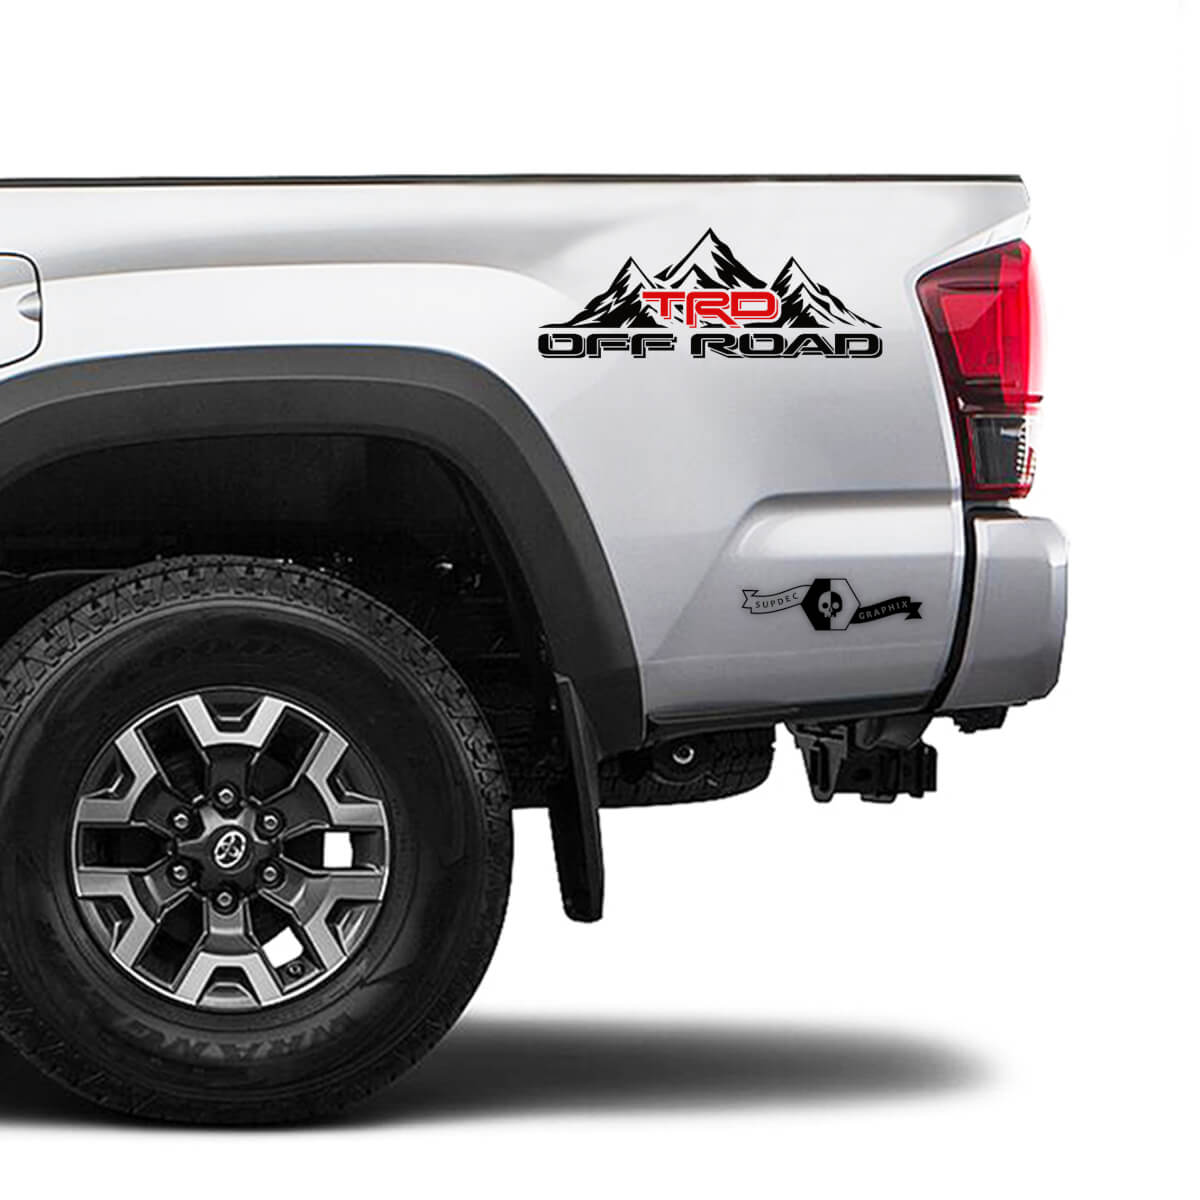 2 TRD 4x4 Off Road TOYOTA Mountain 2 colors Decals Stickers for Tacoma Tundra 4Runner Hilux side